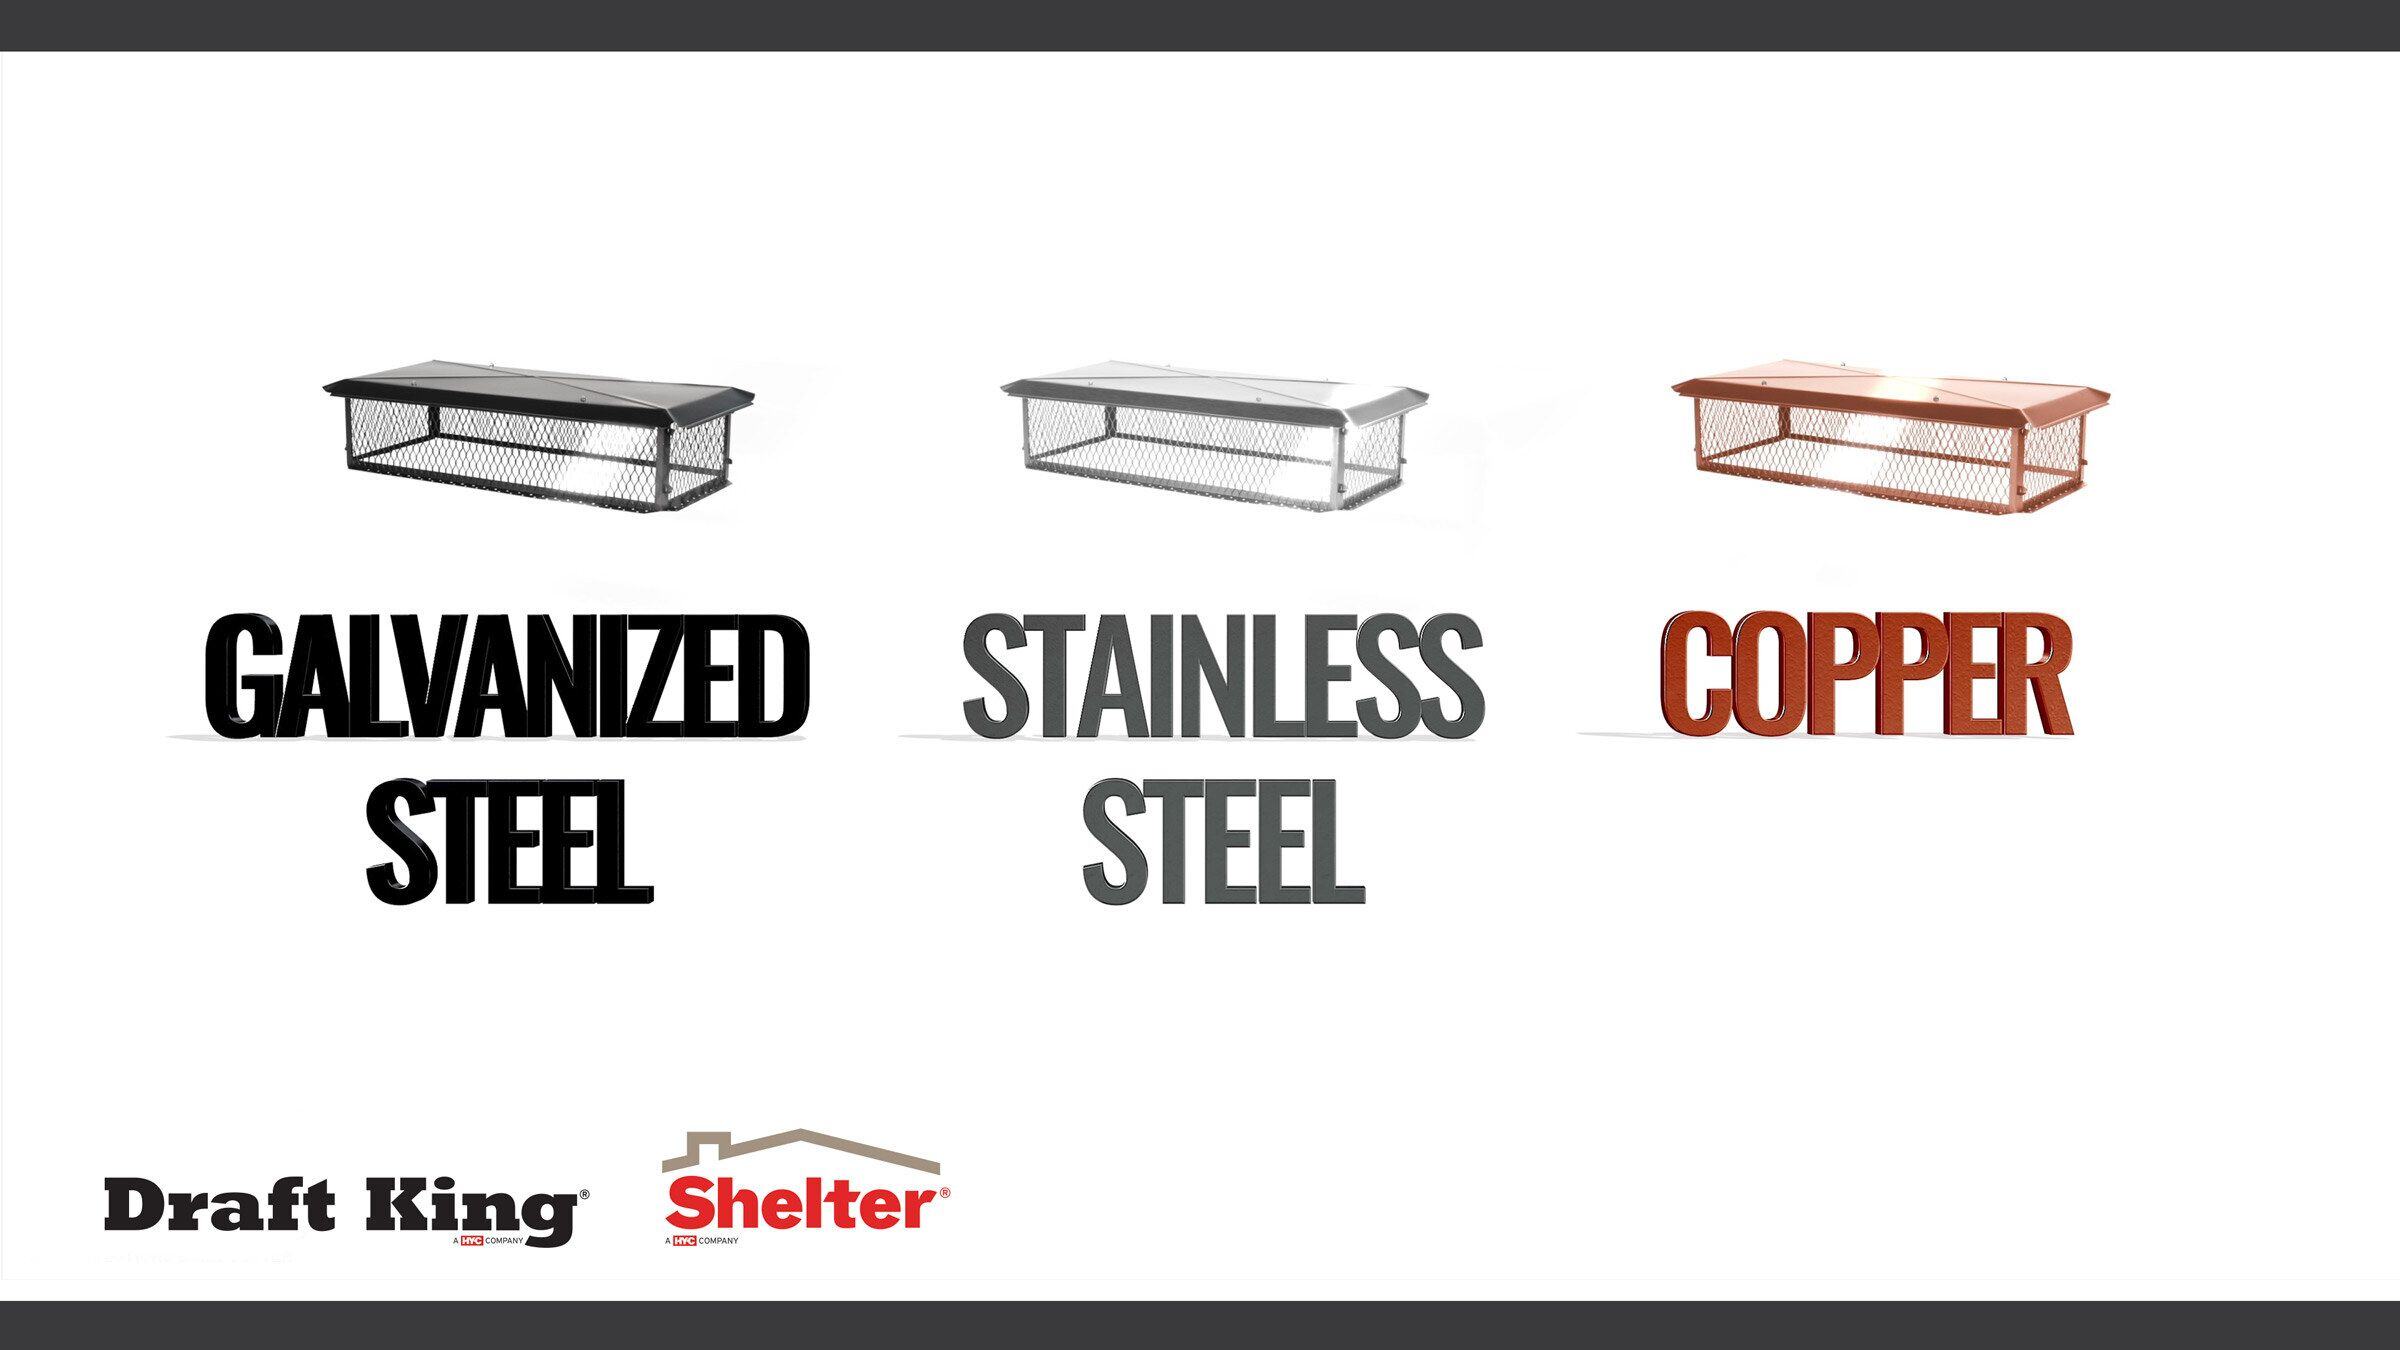 A thumbnail image displaying galvanized steel chimney cap, a stainless steel chimney cap, and a copper chimney cap. Each cap is labeled.